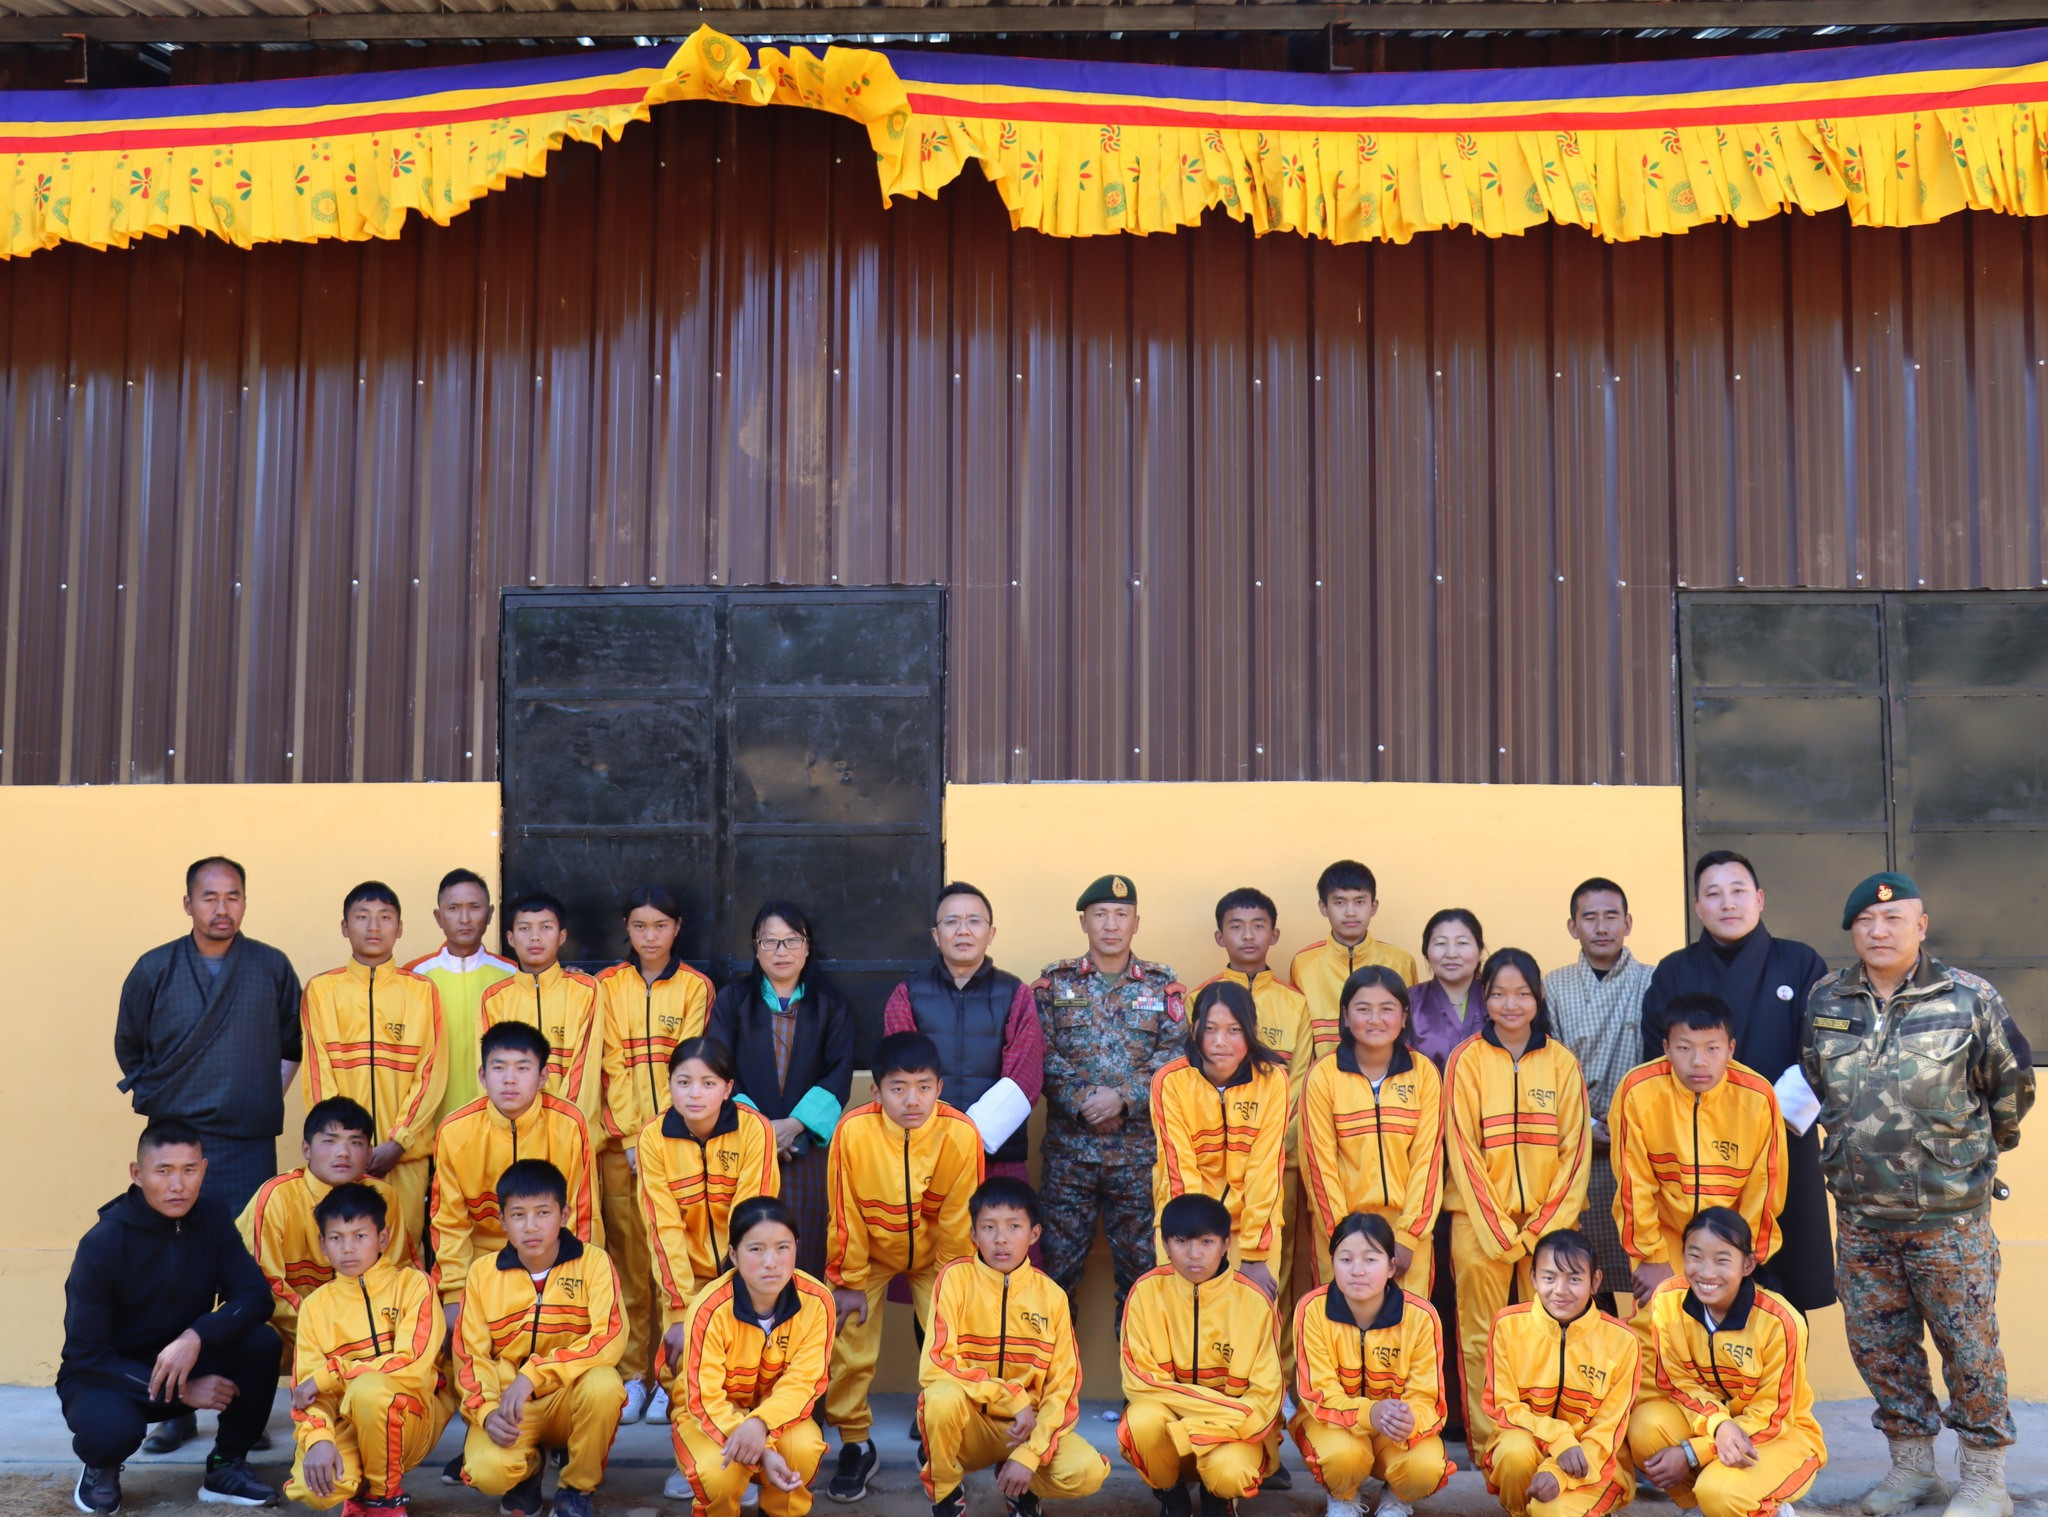 Eleven girls and 11 boys will be the first intake for Bhutan's boxing academy but officials hope numbers will soon rise ©Facebook/BOC